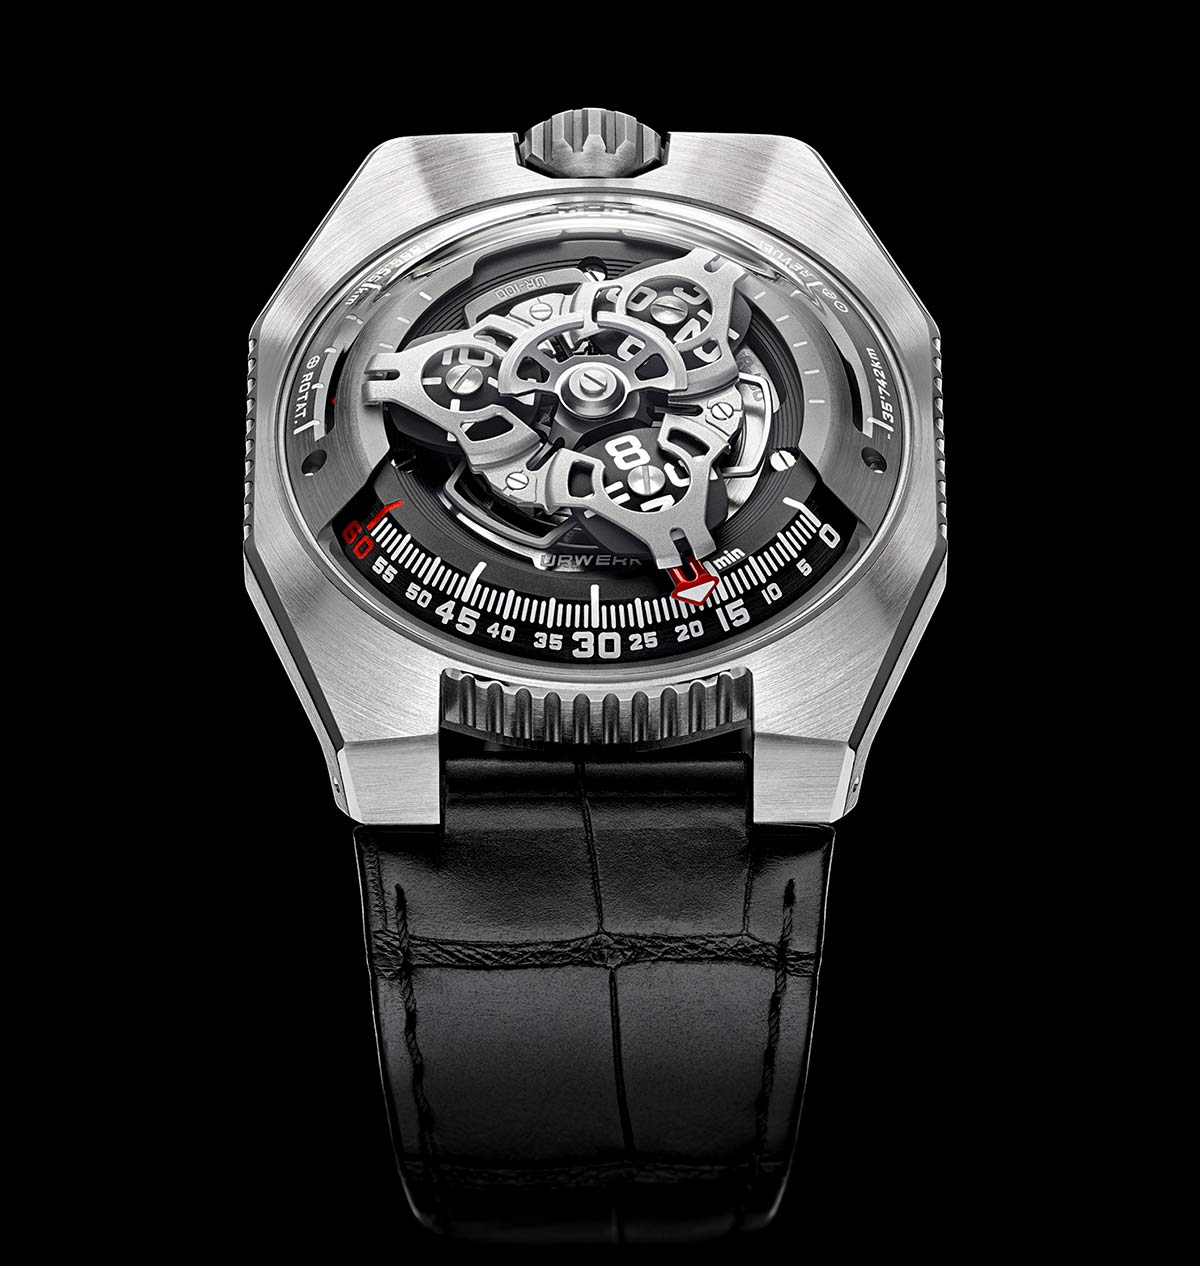 Urwerk - UR-100 SpaceTime | Time and Watches | The watch blog